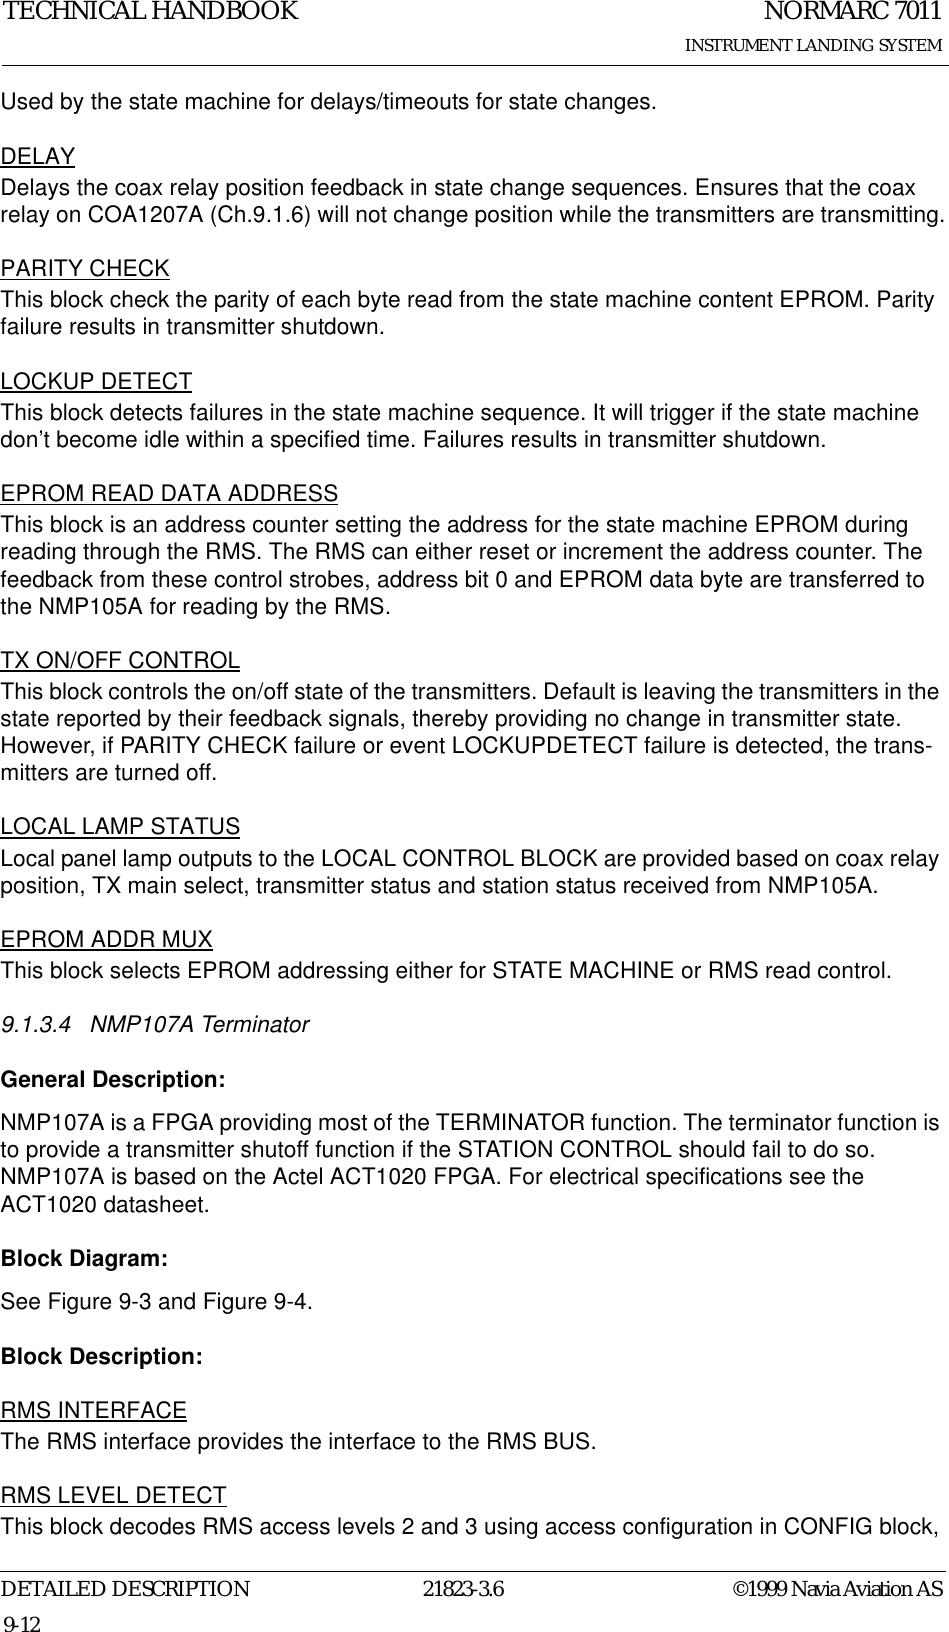 NORMARC 7011INSTRUMENT LANDING SYSTEMTECHNICAL HANDBOOKDETAILED DESCRIPTION 21823-3.6 ©1999 Navia Aviation AS9-12Used by the state machine for delays/timeouts for state changes.DELAYDelays the coax relay position feedback in state change sequences. Ensures that the coax relay on COA1207A (Ch.9.1.6) will not change position while the transmitters are transmitting.PARITY CHECKThis block check the parity of each byte read from the state machine content EPROM. Parity failure results in transmitter shutdown.LOCKUP DETECTThis block detects failures in the state machine sequence. It will trigger if the state machine don’t become idle within a specified time. Failures results in transmitter shutdown.EPROM READ DATA ADDRESSThis block is an address counter setting the address for the state machine EPROM during reading through the RMS. The RMS can either reset or increment the address counter. The feedback from these control strobes, address bit 0 and EPROM data byte are transferred to the NMP105A for reading by the RMS.TX ON/OFF CONTROLThis block controls the on/off state of the transmitters. Default is leaving the transmitters in the state reported by their feedback signals, thereby providing no change in transmitter state. However, if PARITY CHECK failure or event LOCKUPDETECT failure is detected, the trans-mitters are turned off.LOCAL LAMP STATUSLocal panel lamp outputs to the LOCAL CONTROL BLOCK are provided based on coax relay position, TX main select, transmitter status and station status received from NMP105A.EPROM ADDR MUXThis block selects EPROM addressing either for STATE MACHINE or RMS read control.9.1.3.4 NMP107A Terminator General Description:NMP107A is a FPGA providing most of the TERMINATOR function. The terminator function is to provide a transmitter shutoff function if the STATION CONTROL should fail to do so. NMP107A is based on the Actel ACT1020 FPGA. For electrical specifications see the ACT1020 datasheet.Block Diagram:See Figure 9-3 and Figure 9-4.Block Description:RMS INTERFACEThe RMS interface provides the interface to the RMS BUS.RMS LEVEL DETECTThis block decodes RMS access levels 2 and 3 using access configuration in CONFIG block, 